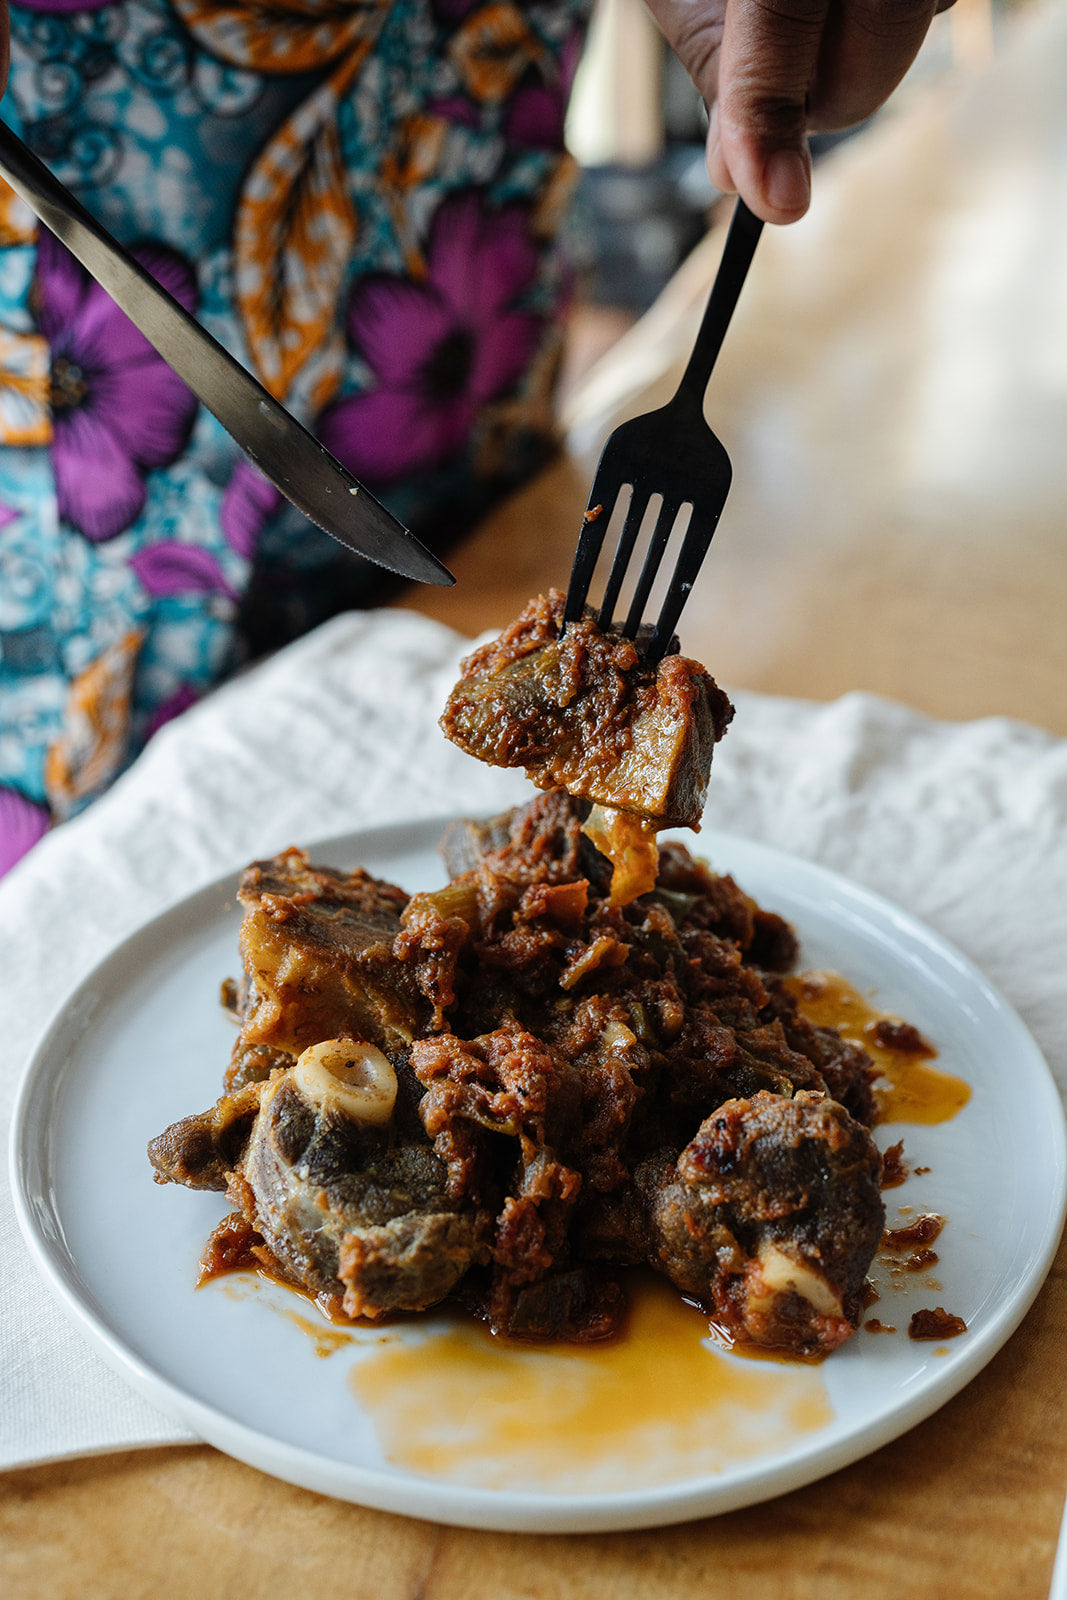 Baked Goat Meat